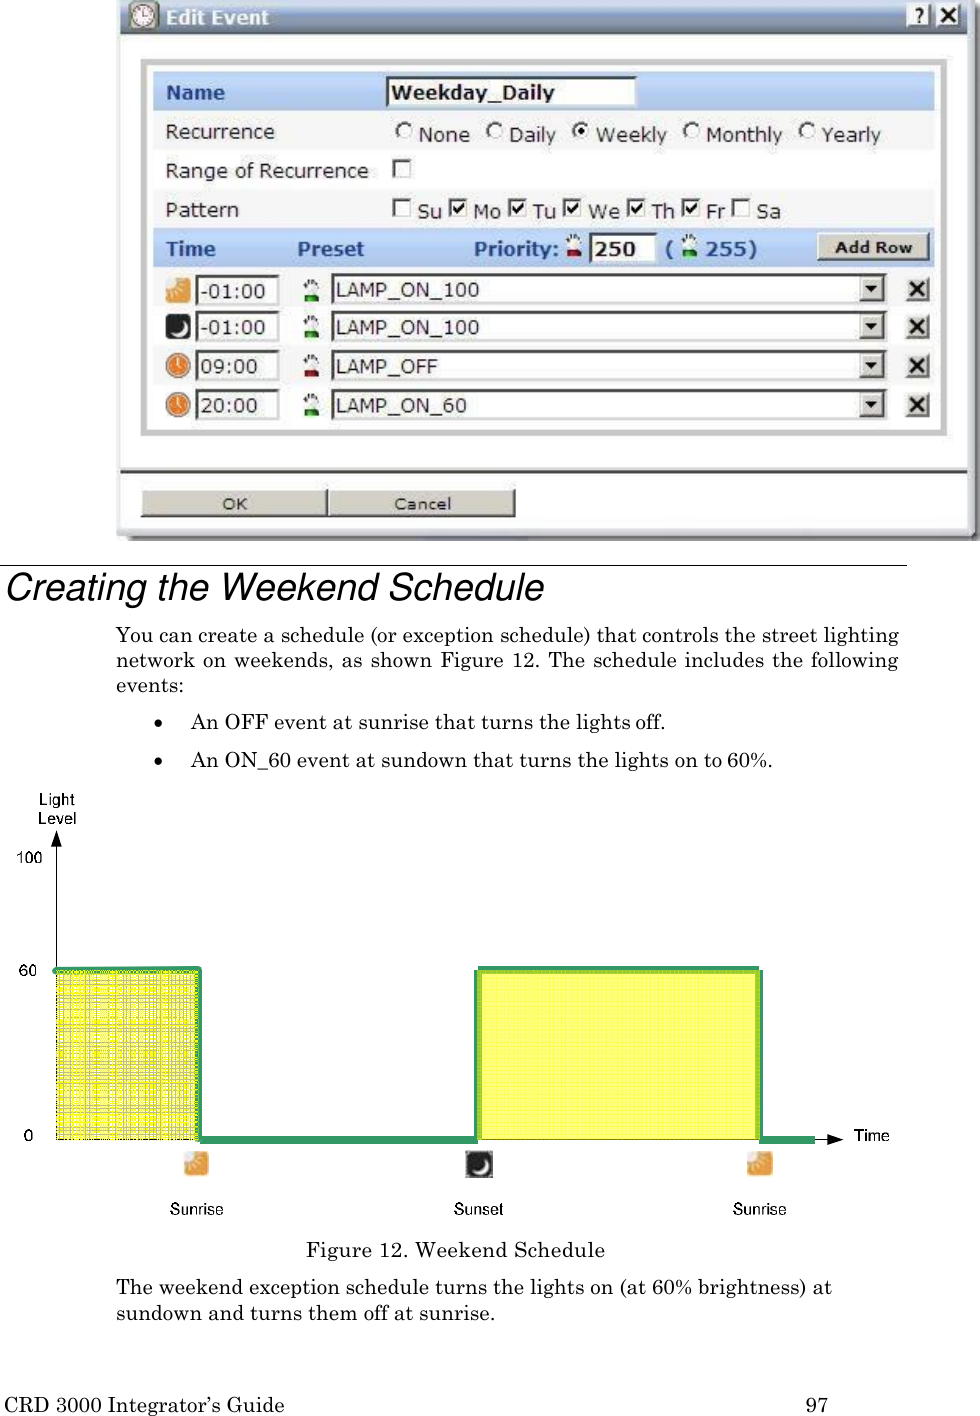 CRD 3000 Integrator’s Guide 97    Creating the Weekend Schedule You can create a schedule (or exception schedule) that controls the street lighting network on weekends, as  shown Figure 12. The schedule includes the following events:  An OFF event at sunrise that turns the lights off.  An ON_60 event at sundown that turns the lights on to 60%.                  Figure 12. Weekend Schedule The weekend exception schedule turns the lights on (at 60% brightness) at sundown and turns them off at sunrise. 